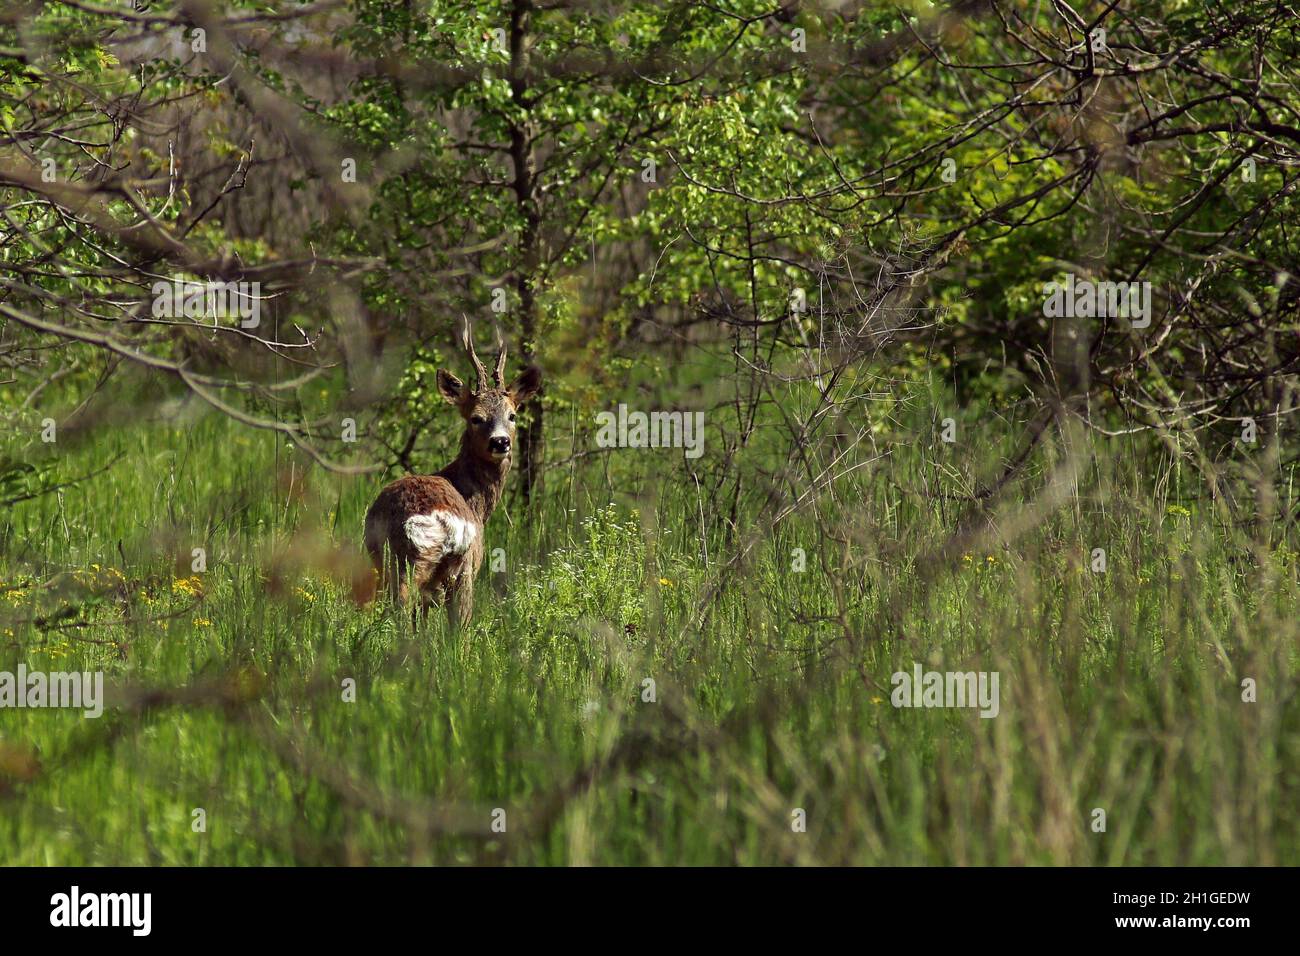 A young roe deer with antlers in the spring forest. Capreolus capreolus. Stock Photo